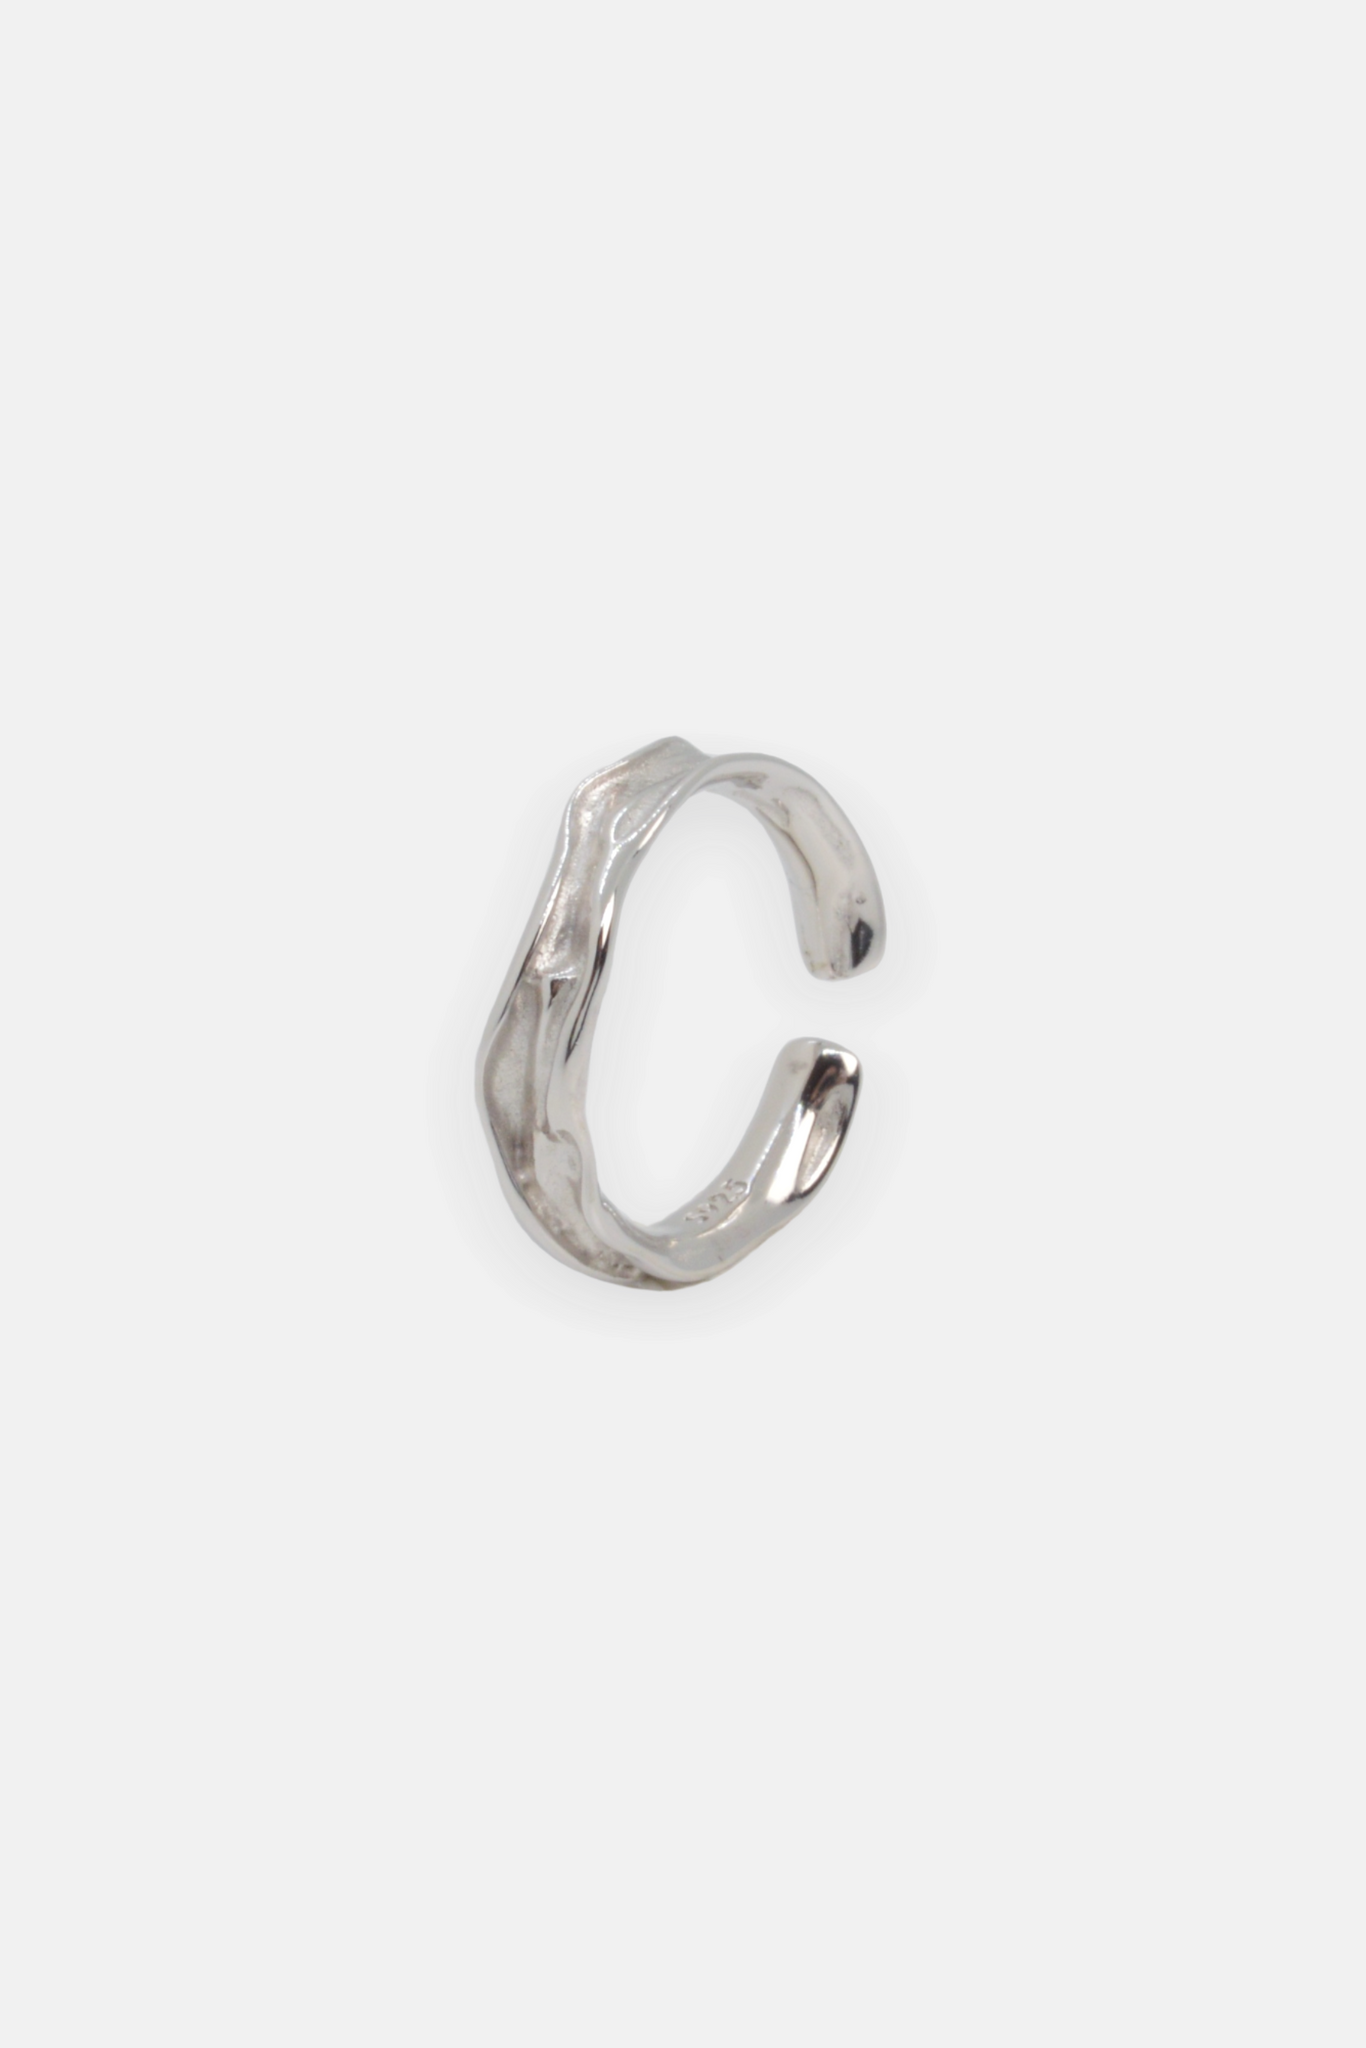 Magma - Irregular Foil Textured Sterling Silver Ring